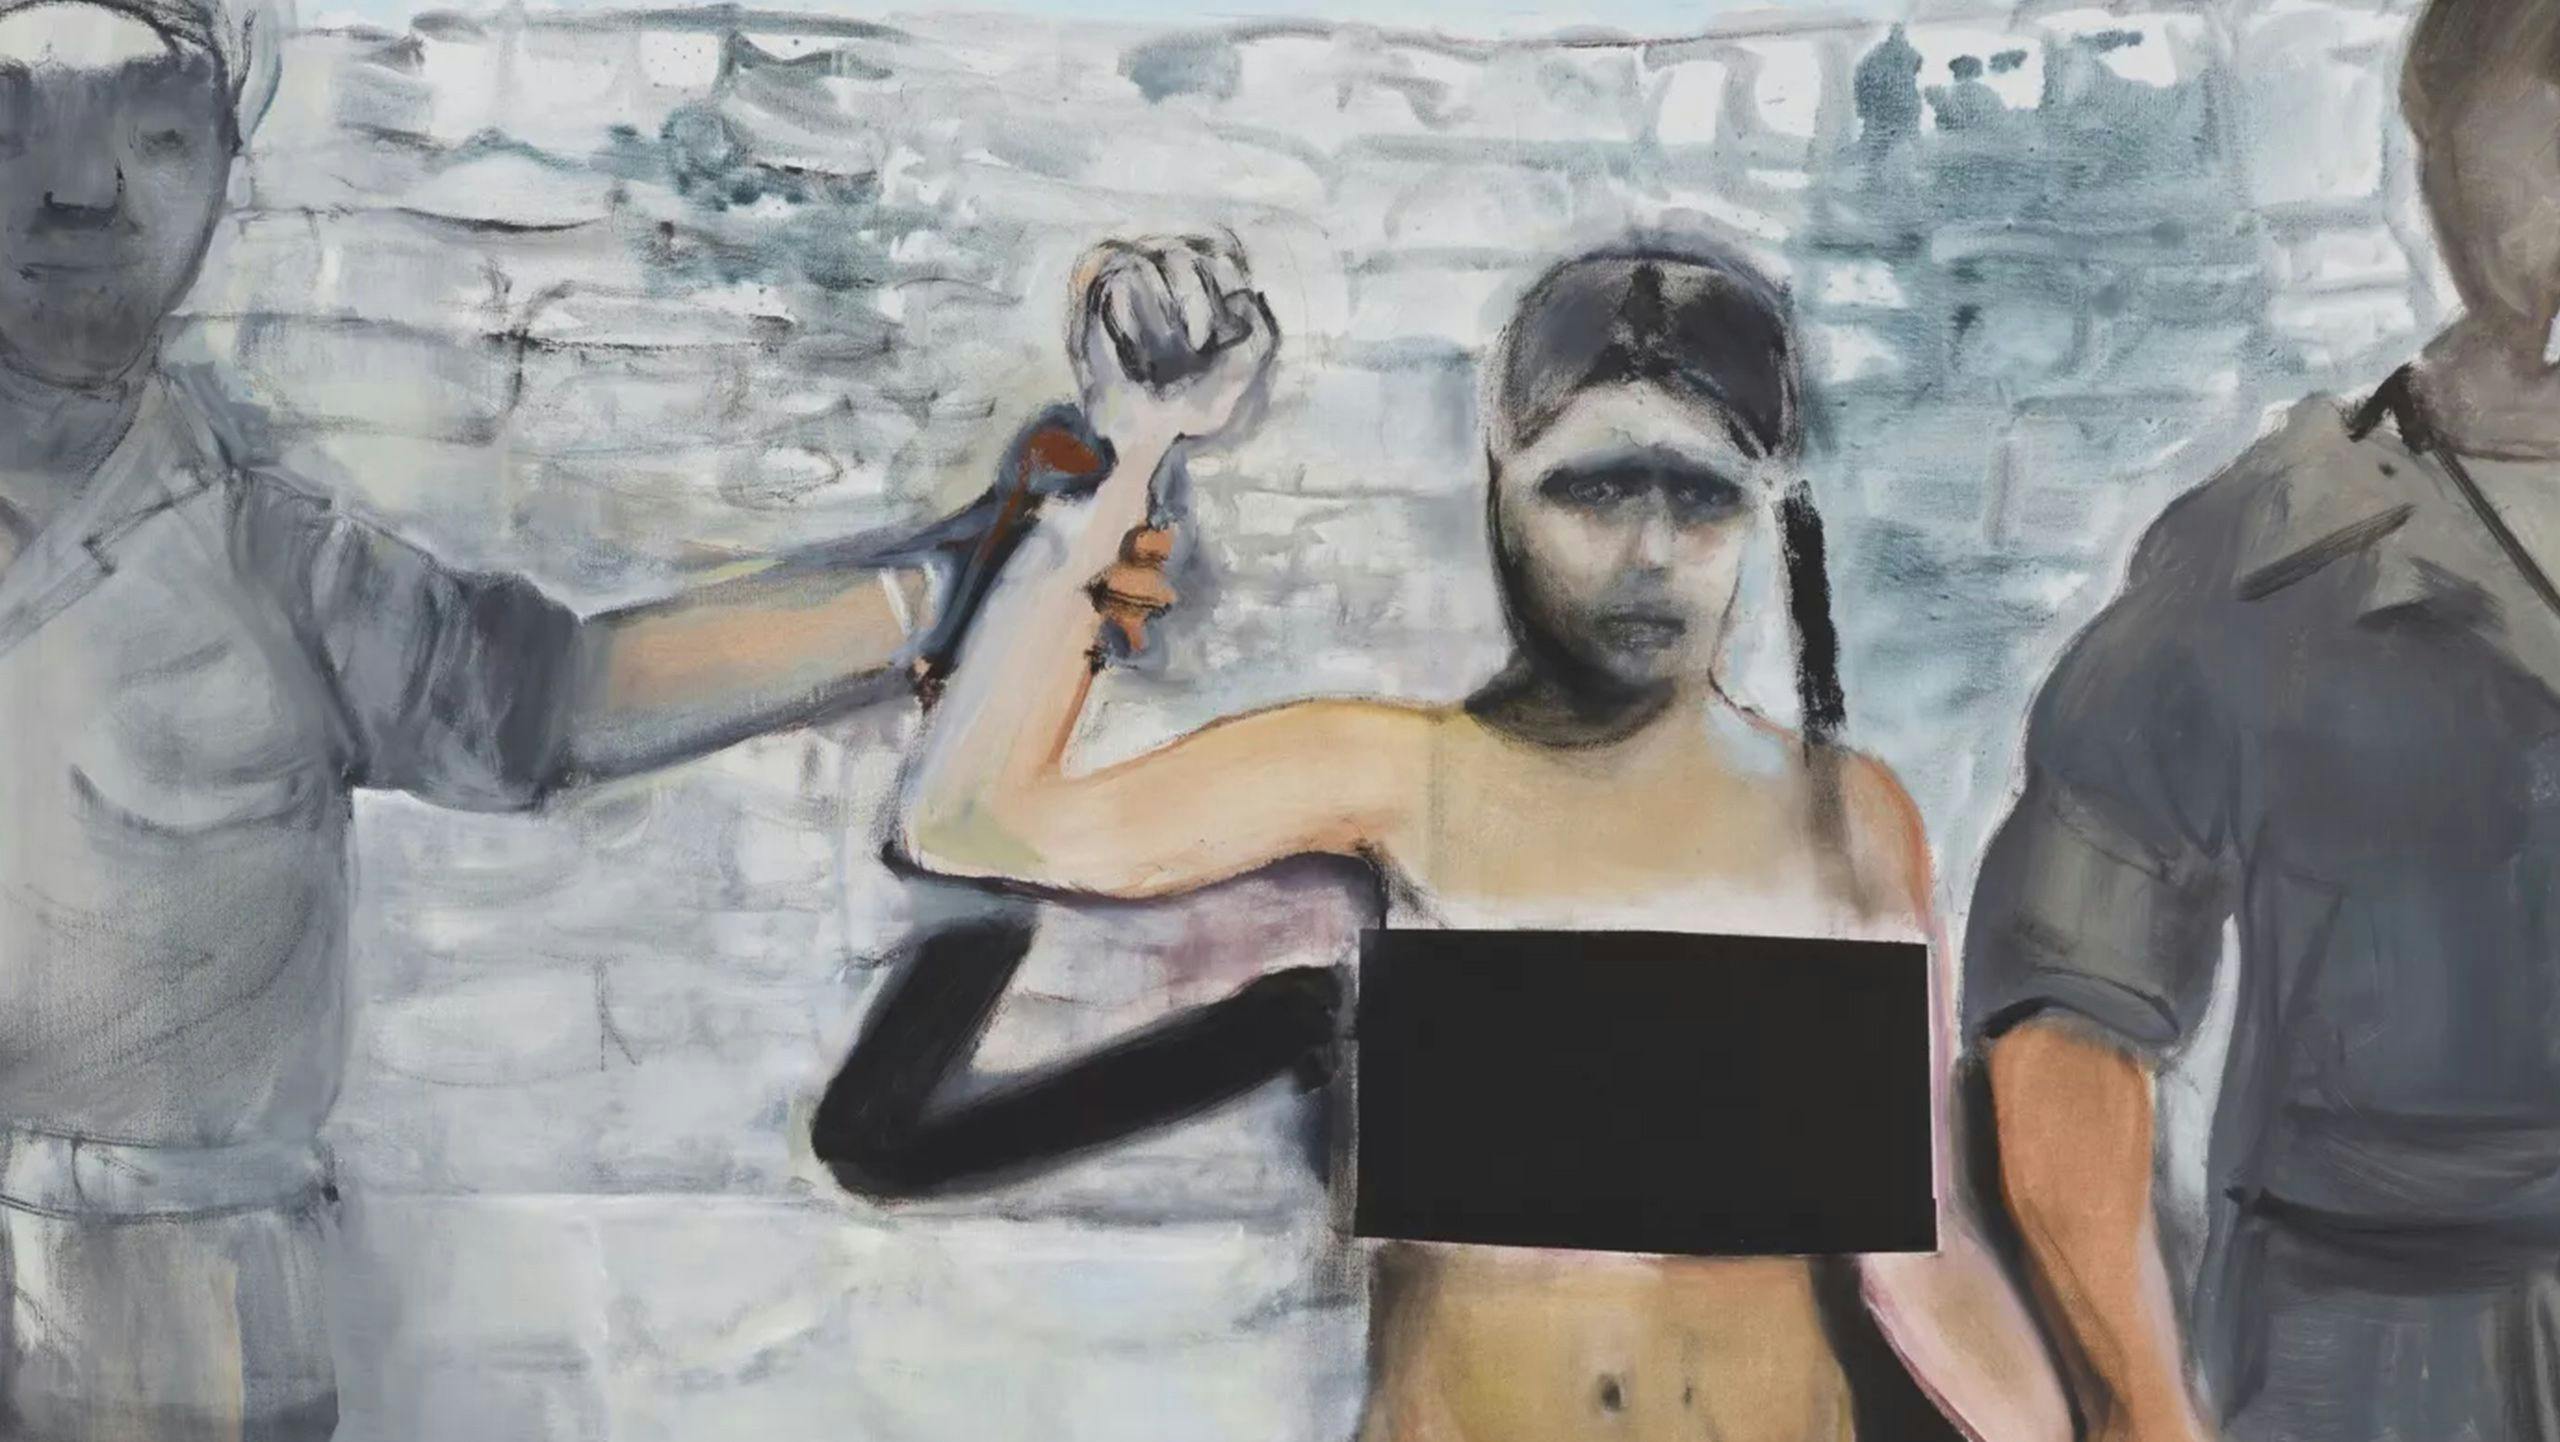 An artwork by Marlene Dumas, titled The Trophy, dated 2013. From the Collection of the Museum of Contemporary Art Chicago and The Edlis Neeson Foundation